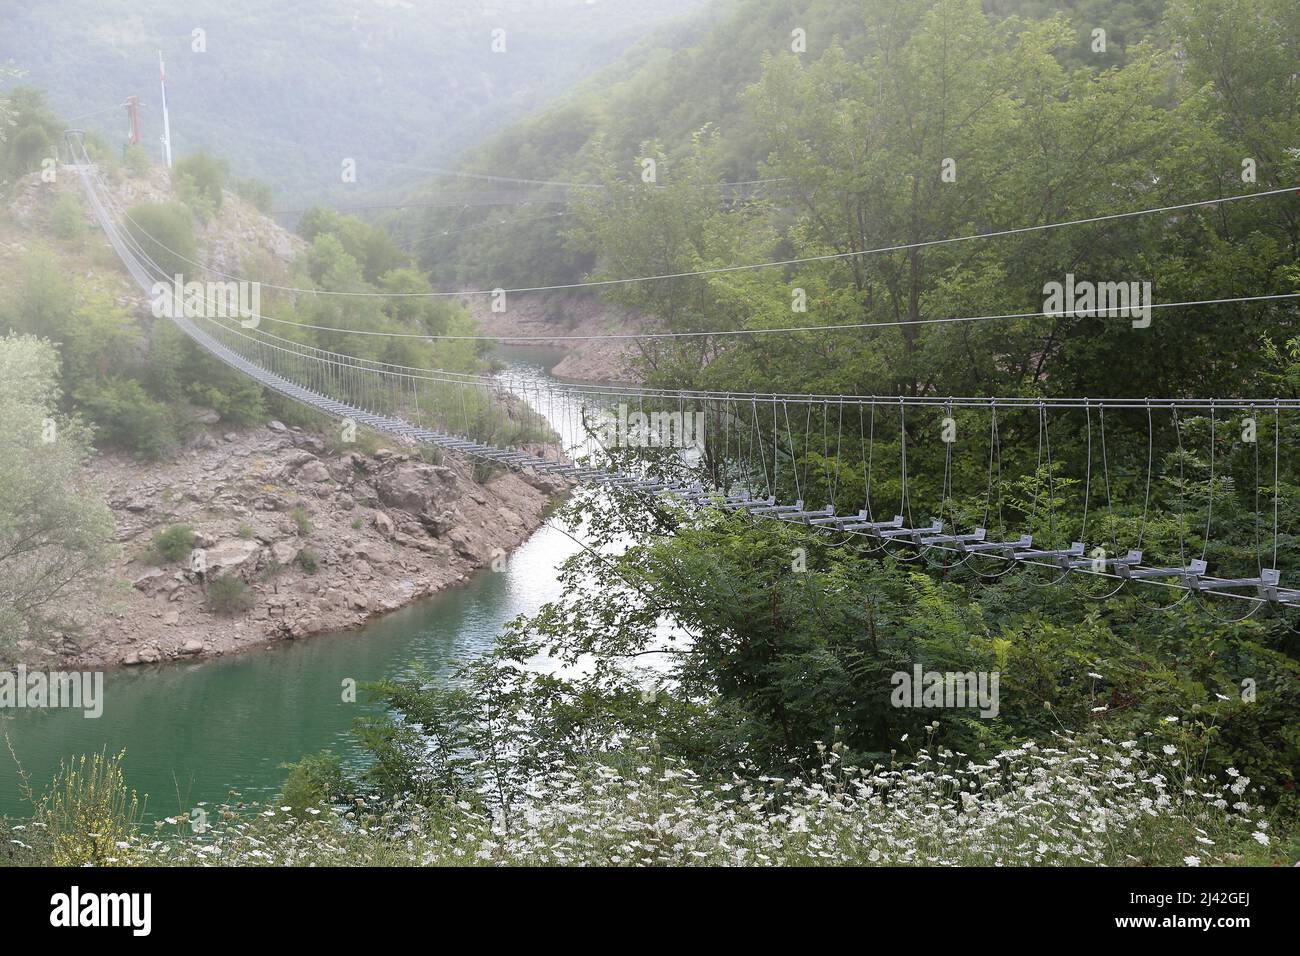 Pedestrian suspension bridge in the fog, surrounded by nature Stock Photo